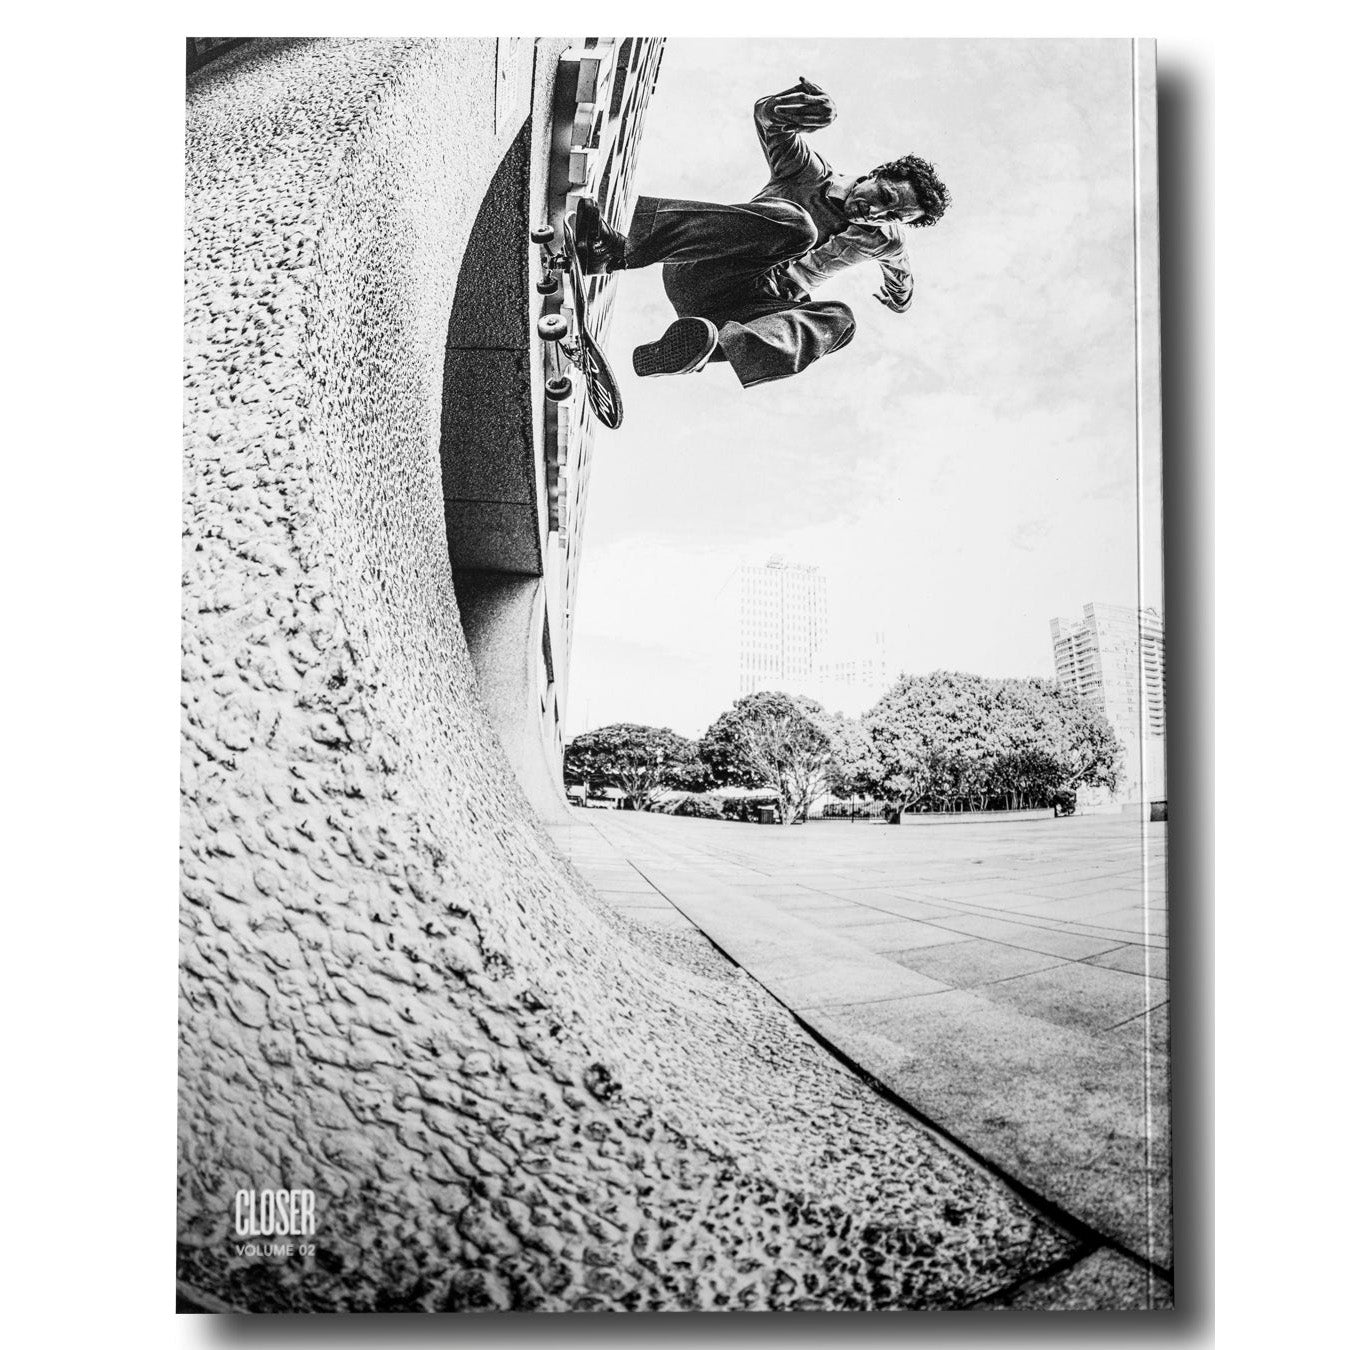 Closer Skateboarding Magazine Vol. 2.3 Issue #7 2024 Down By Law Article